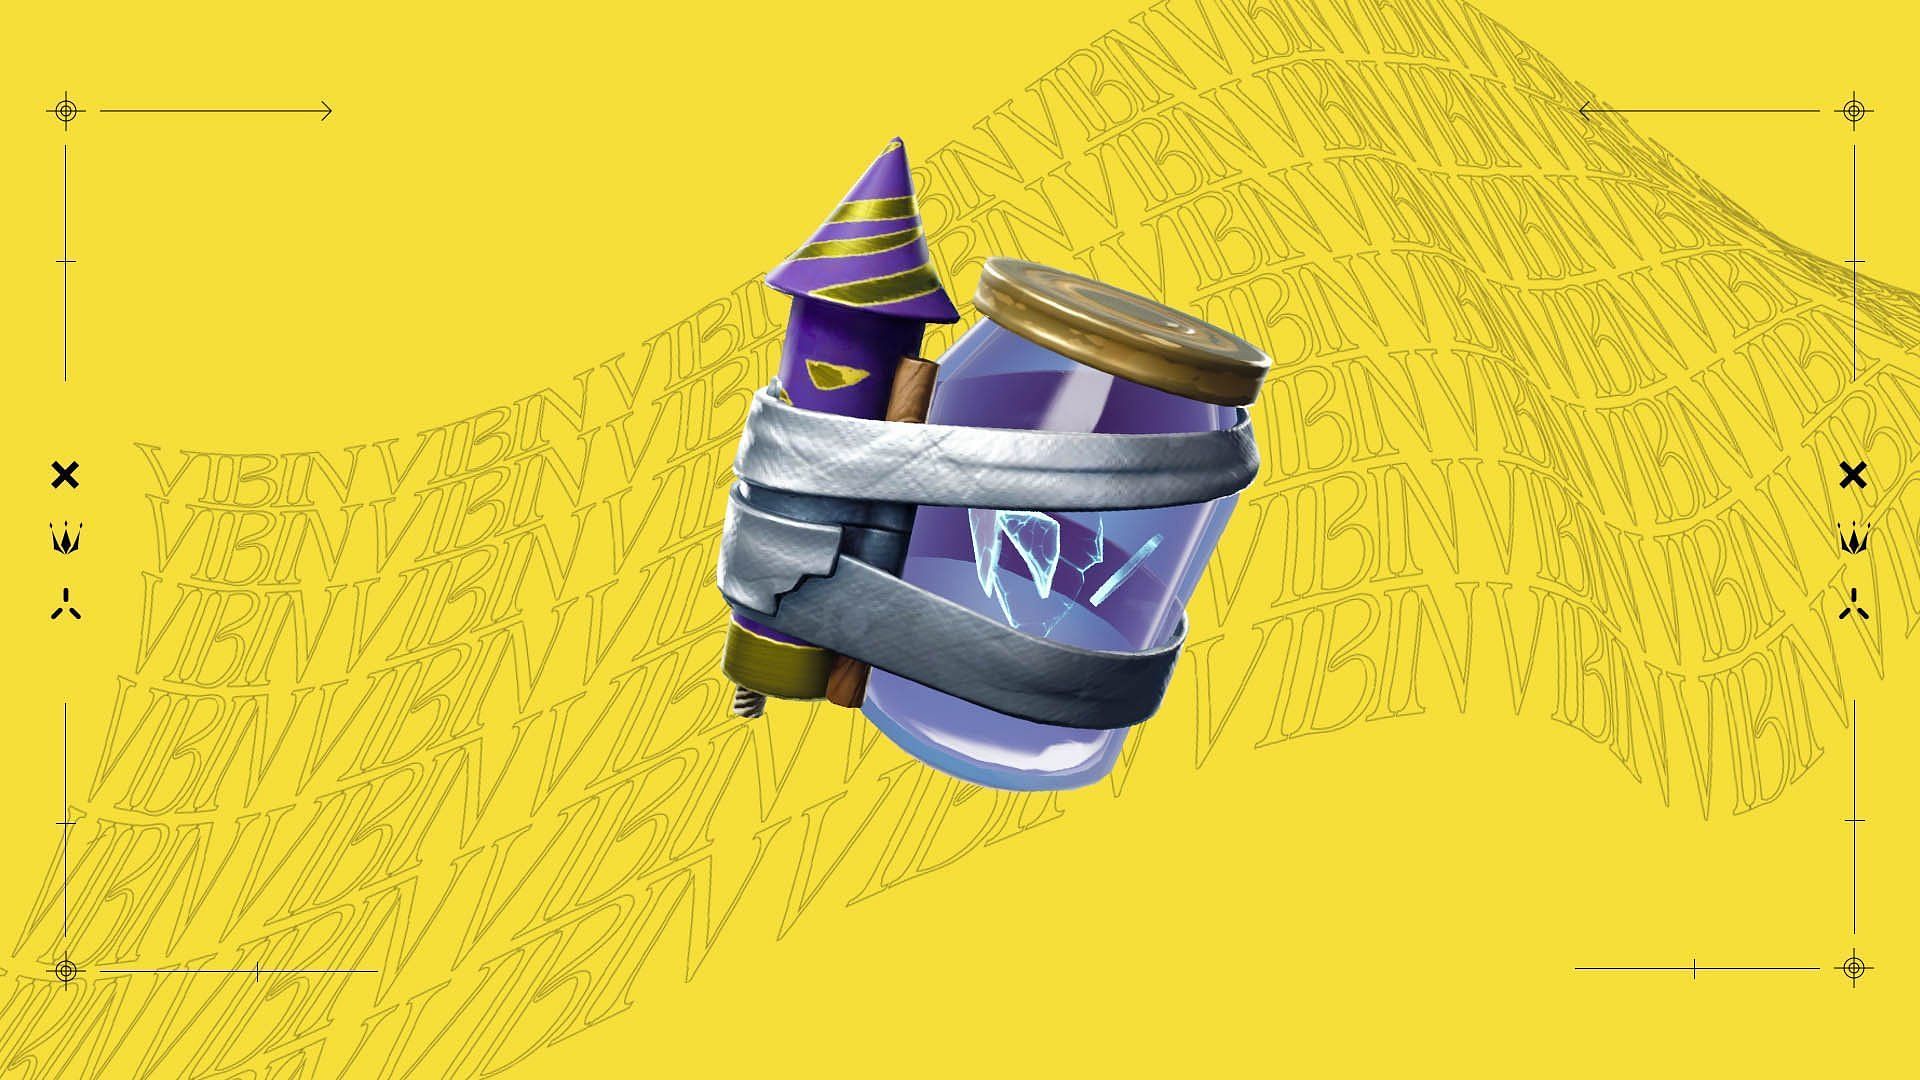 Junk rifts are back in Fortnite, and they are wreaking havoc (Image via Epic Games)